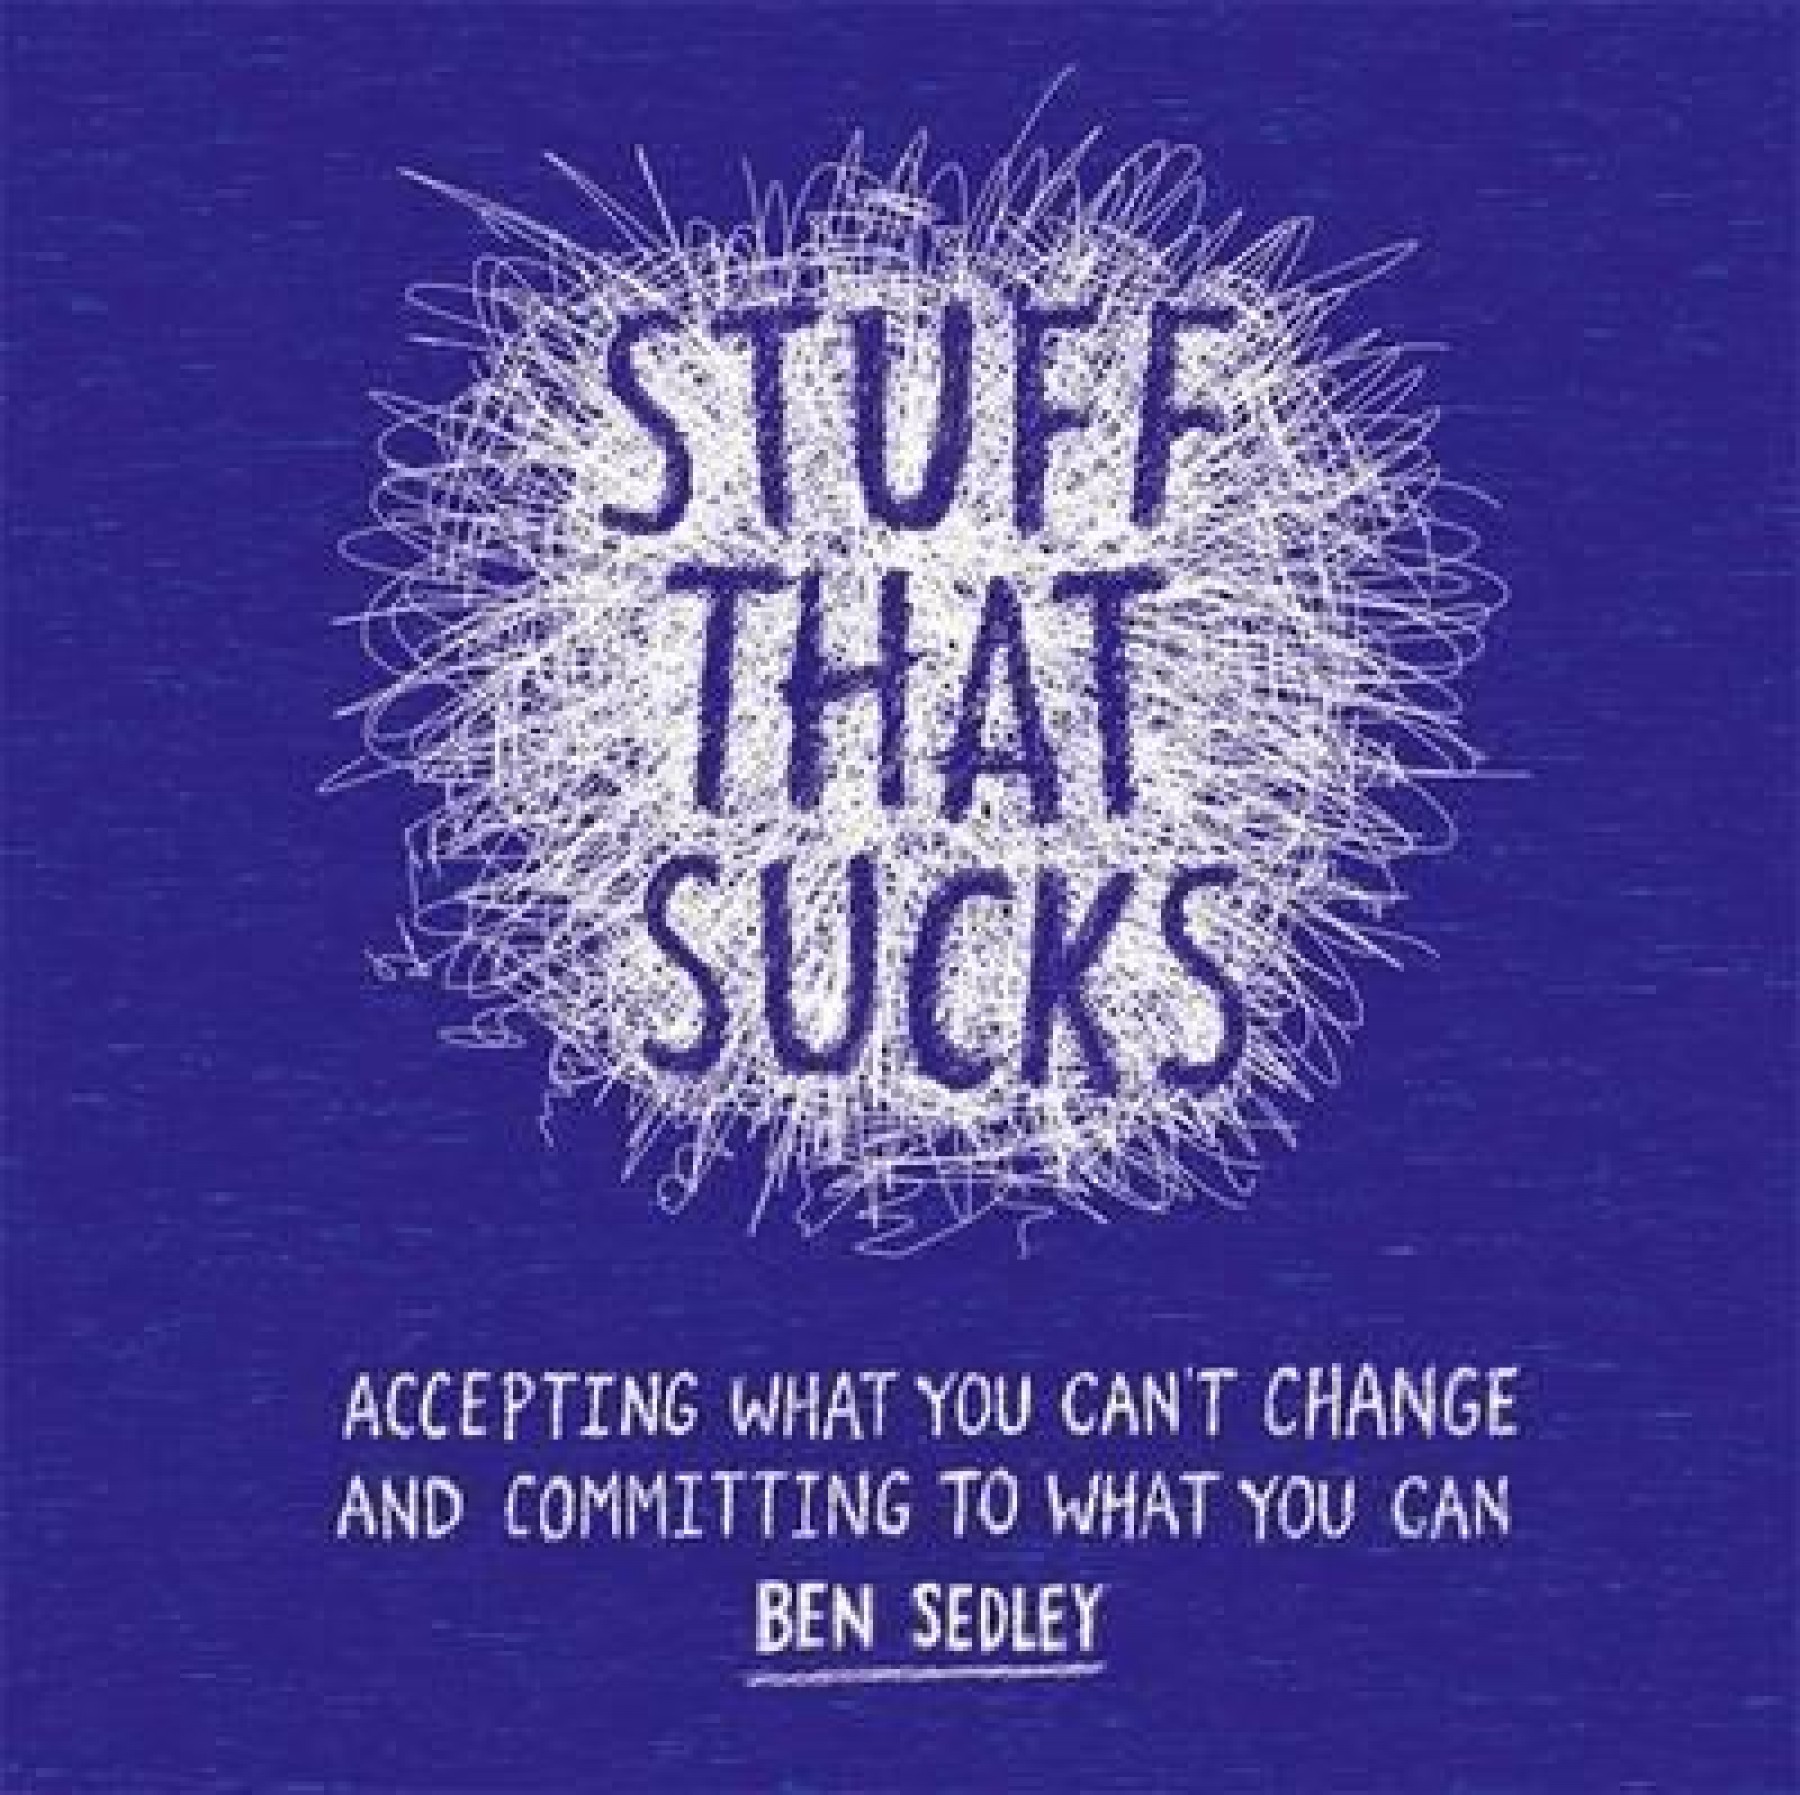 Stuff that sucks: Accepting what you can't change and committing to what you can